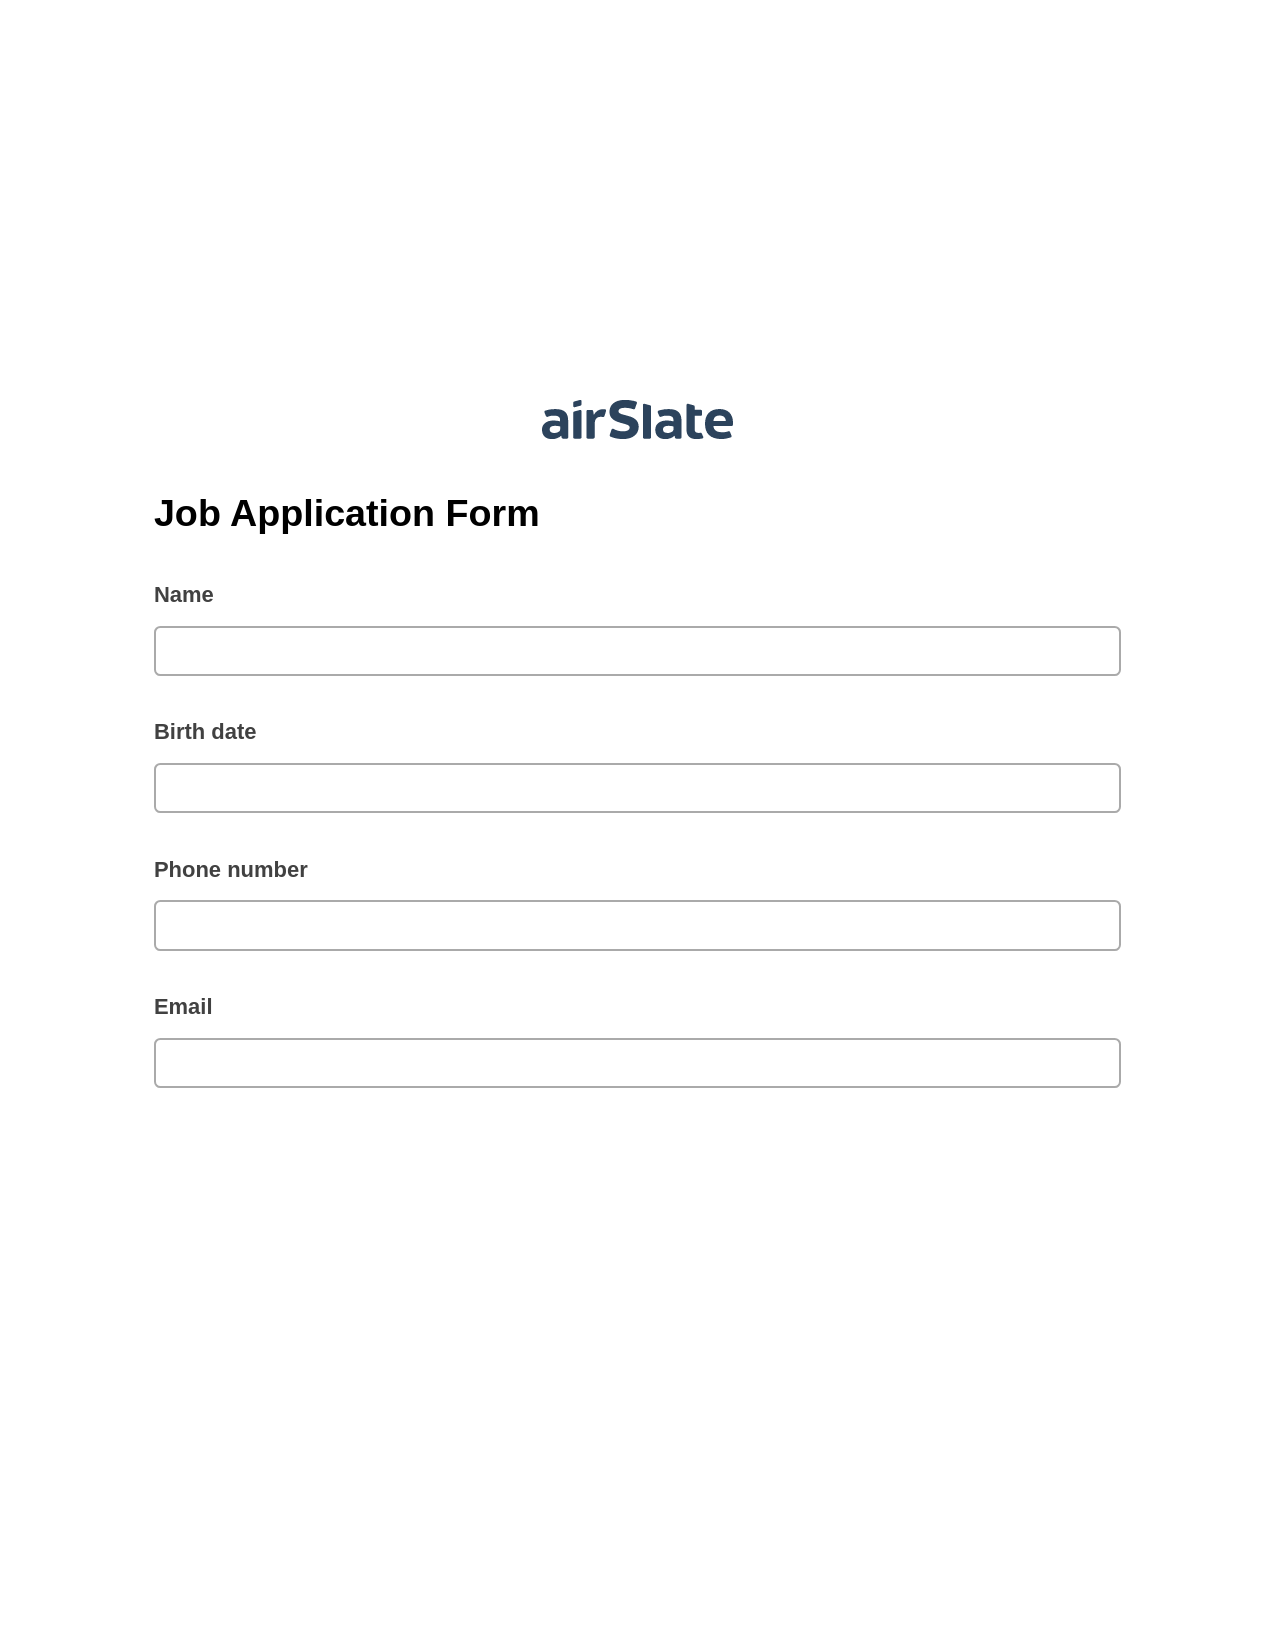 Job Application Form Pre-fill from NetSuite Records Bot, Update NetSuite Records Bot, Google Drive Bot